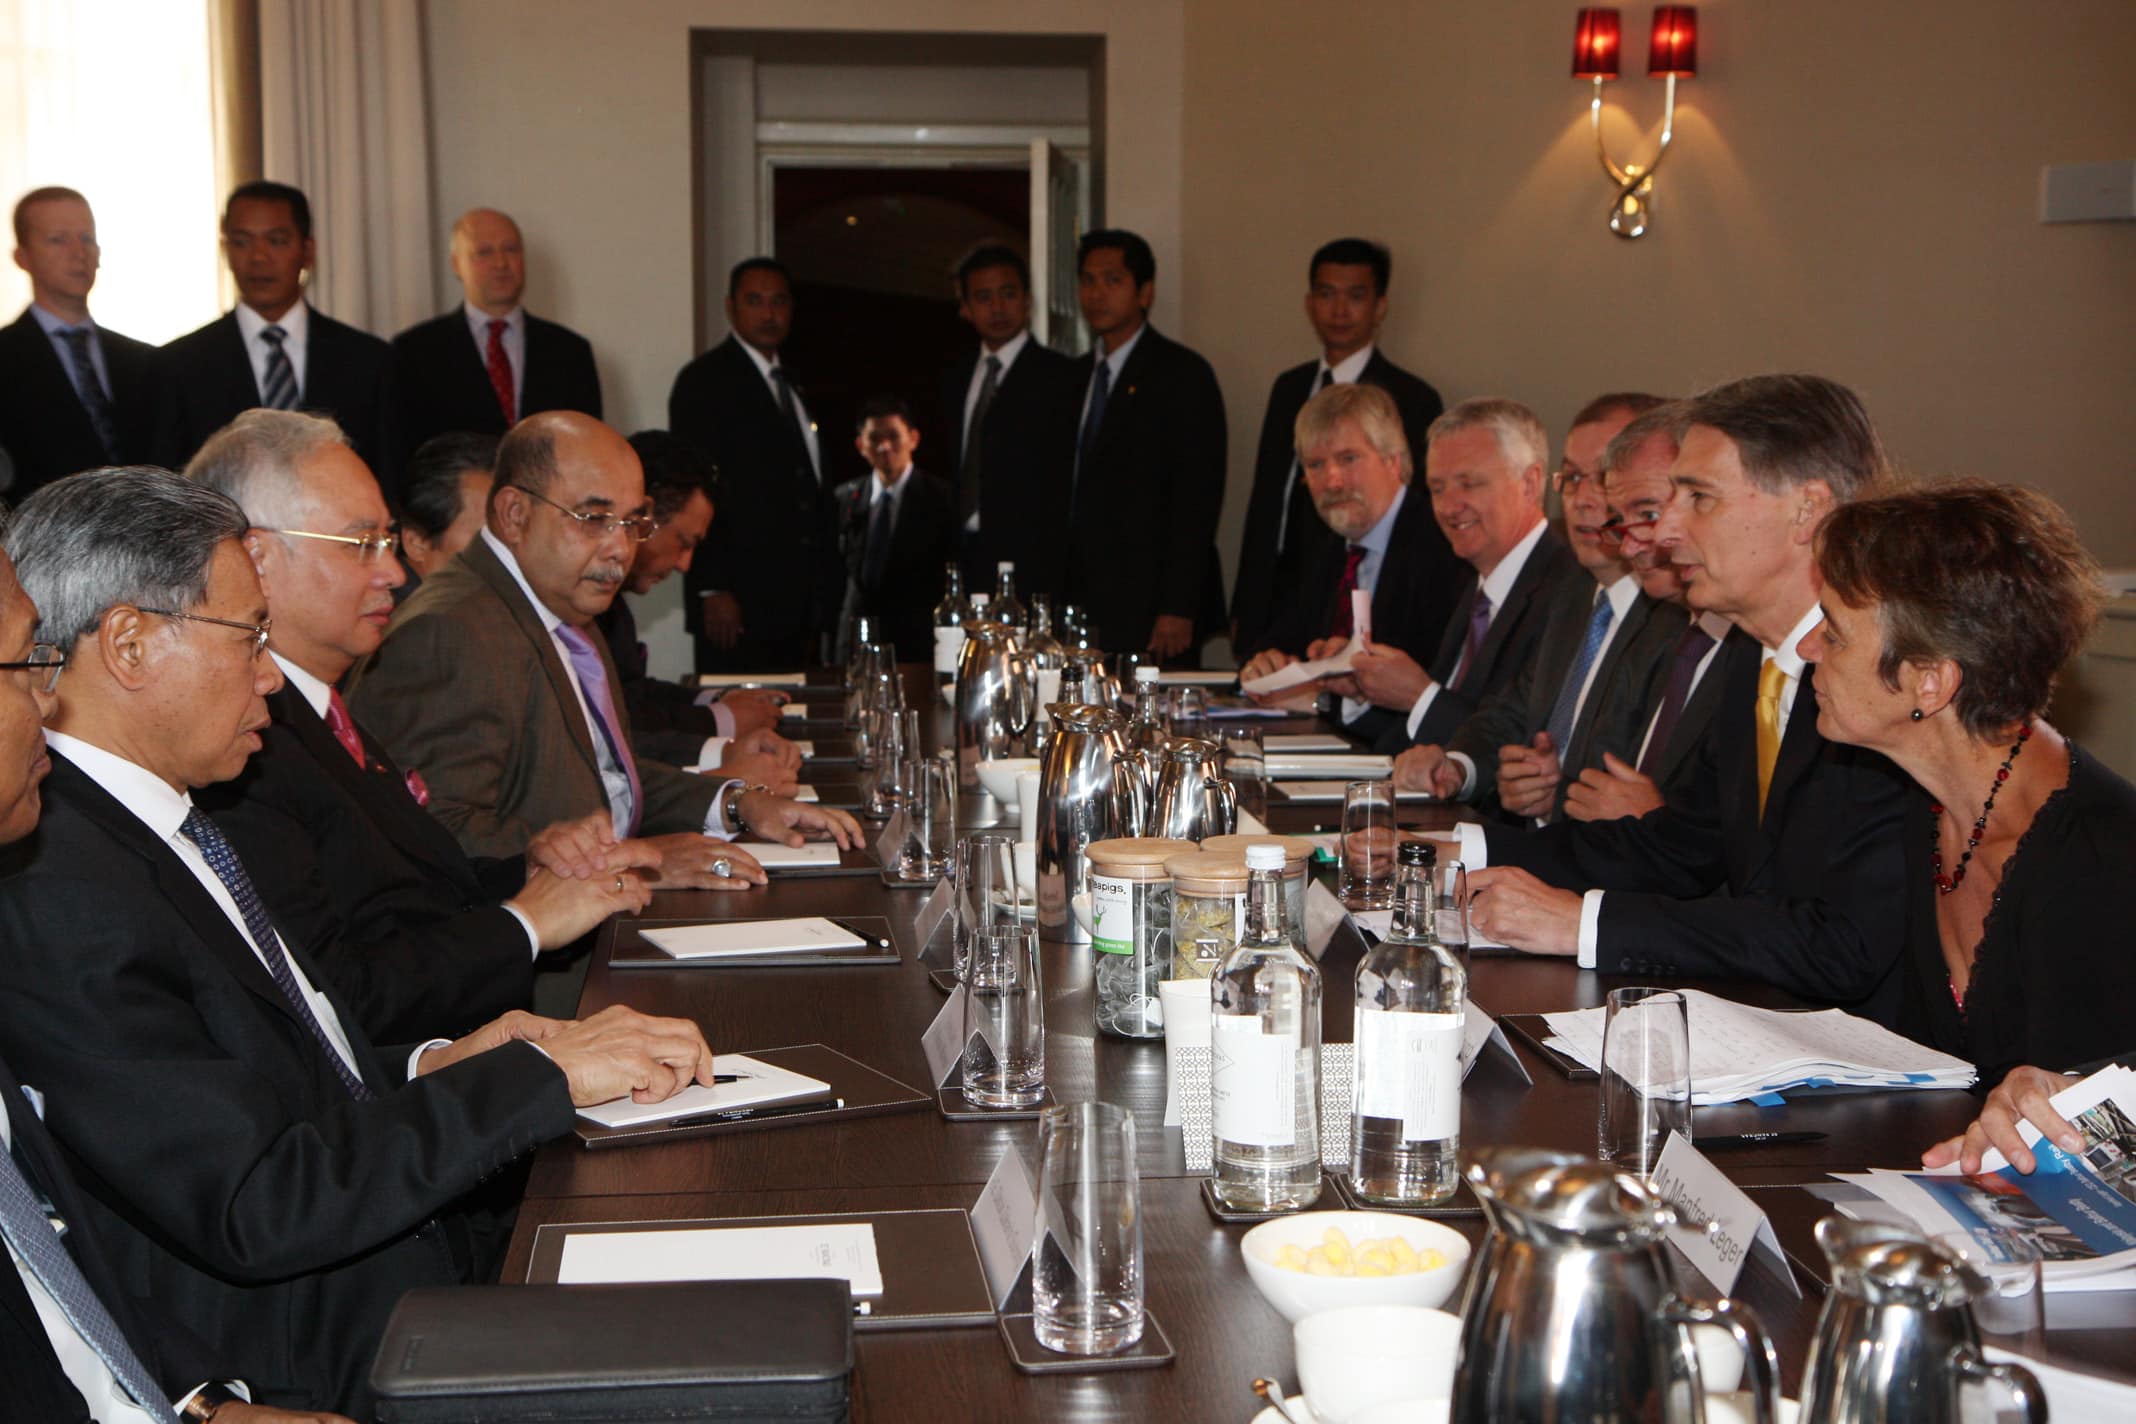 Discussions-with-UK-Rail-companies-on-rail-construction-and-regeneration-Philip-Hammond